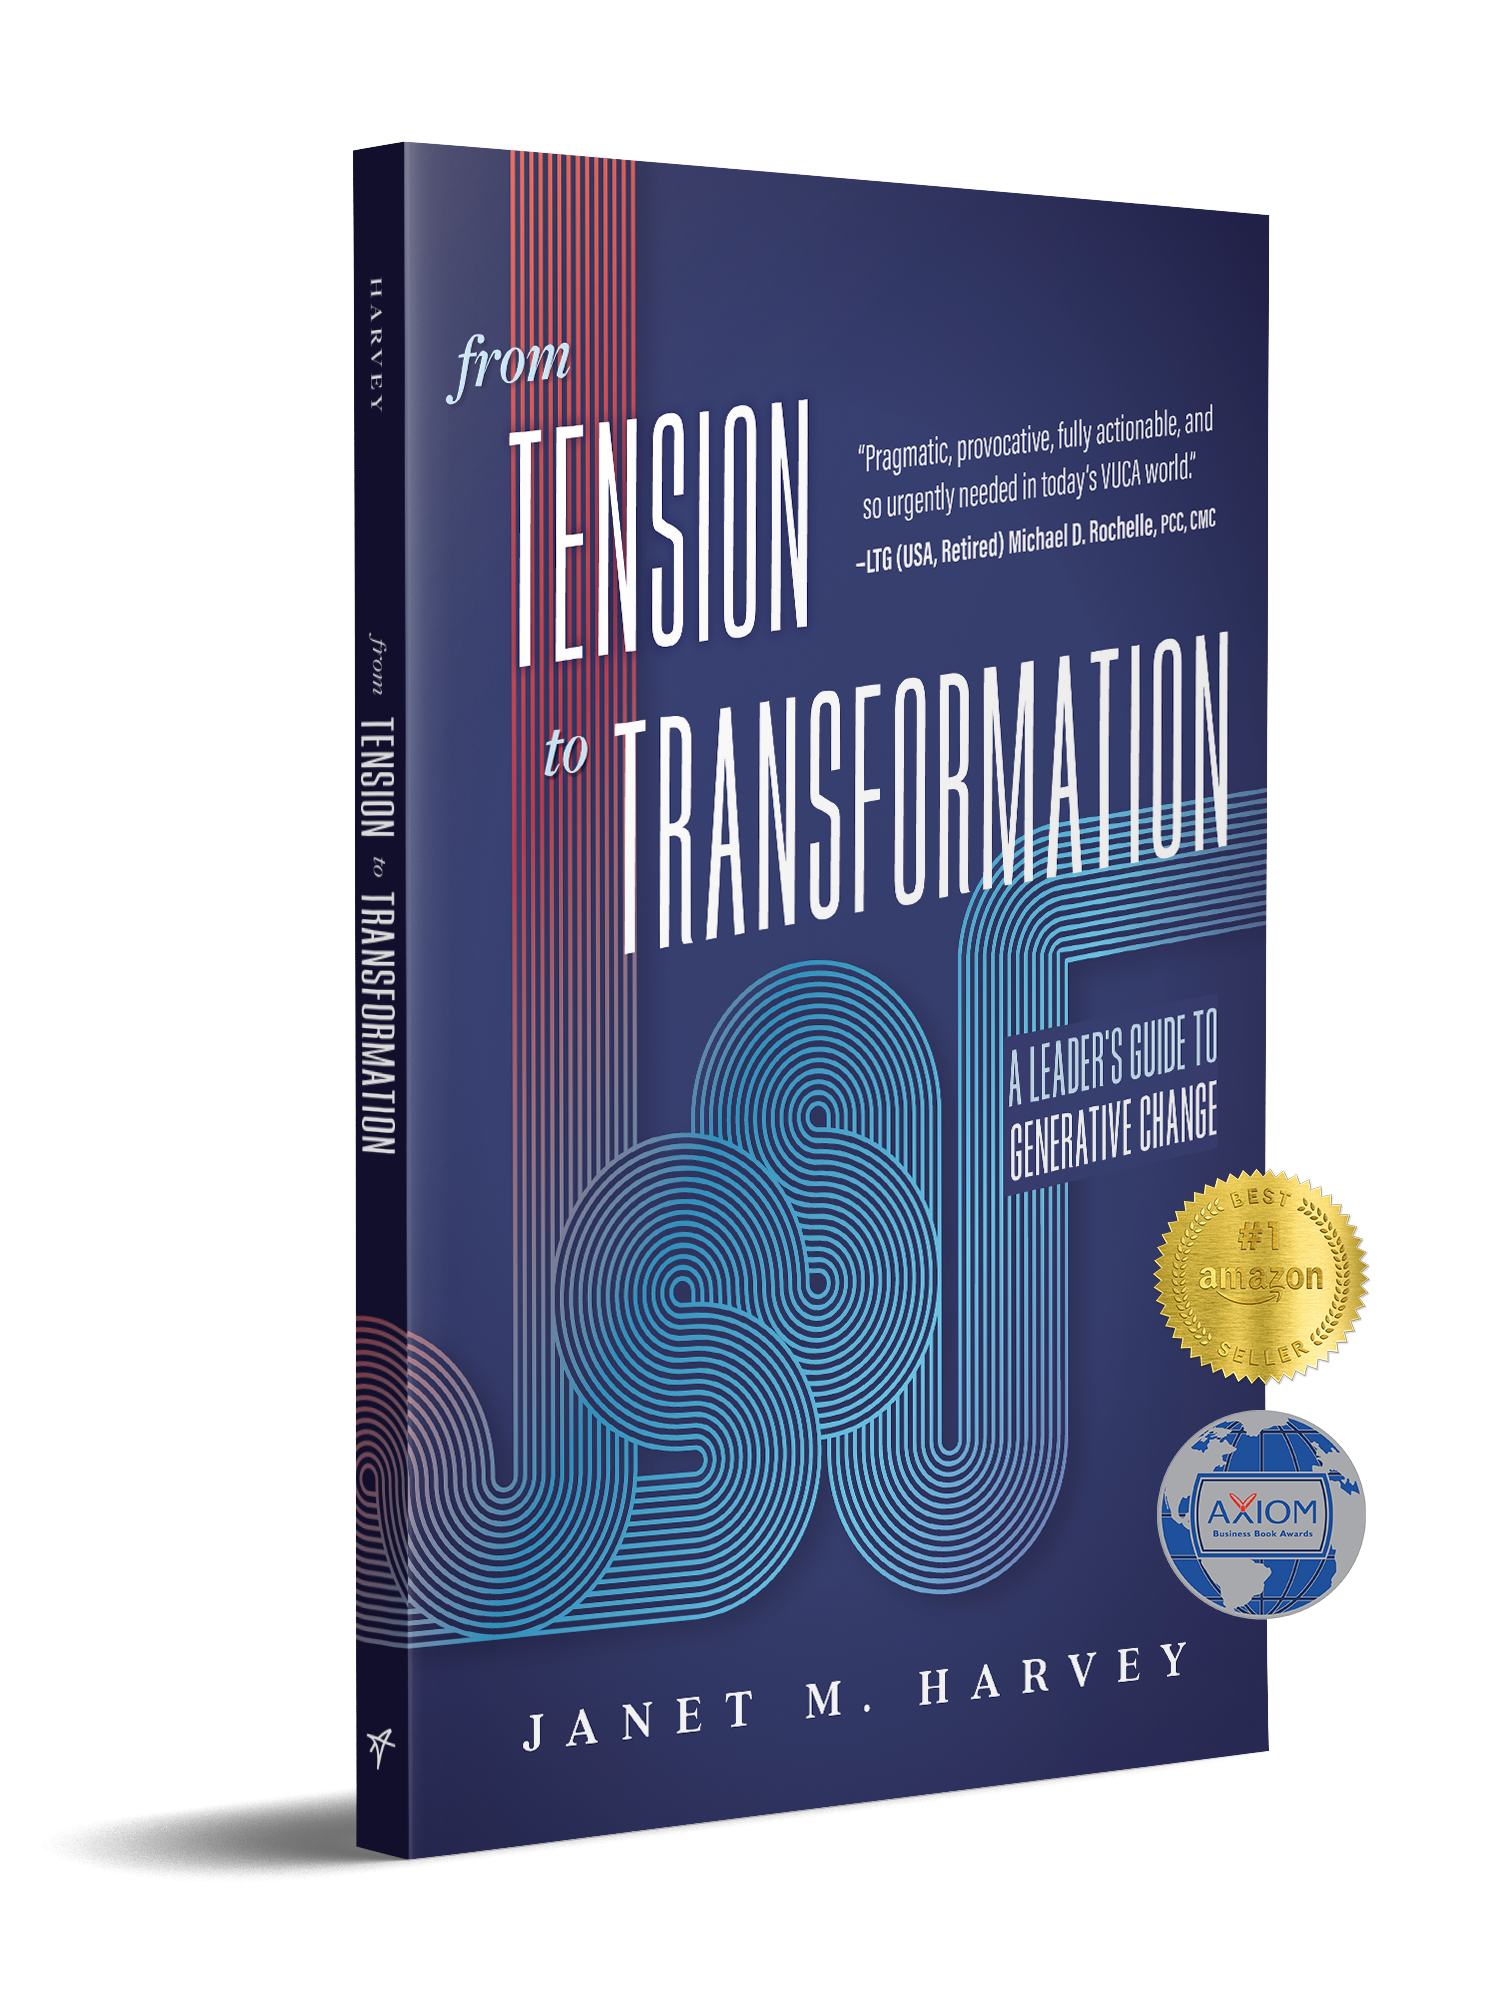 FromTensionTransformation_3D Book Cover